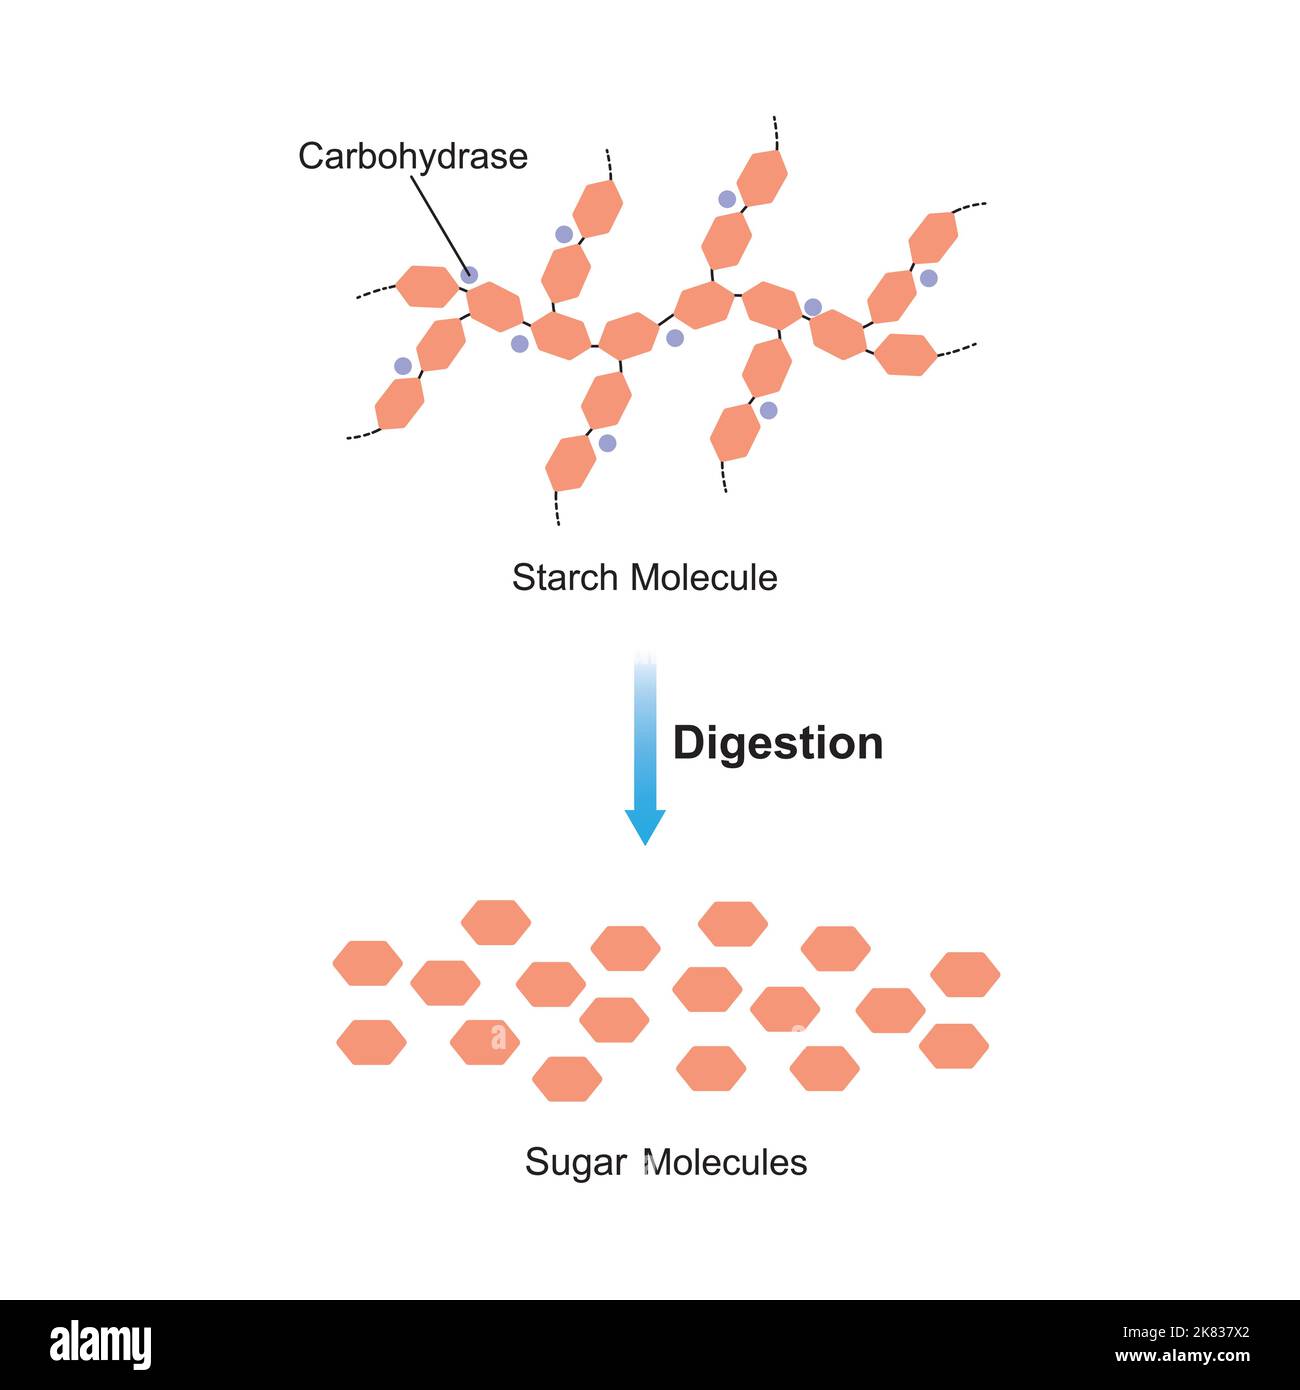 Scientific Designing of Starch Digestion. Carbohydrase Enzyme Effect on Starch Molecule. Maltose Sugar Formation. Vector Illustration. Stock Vector